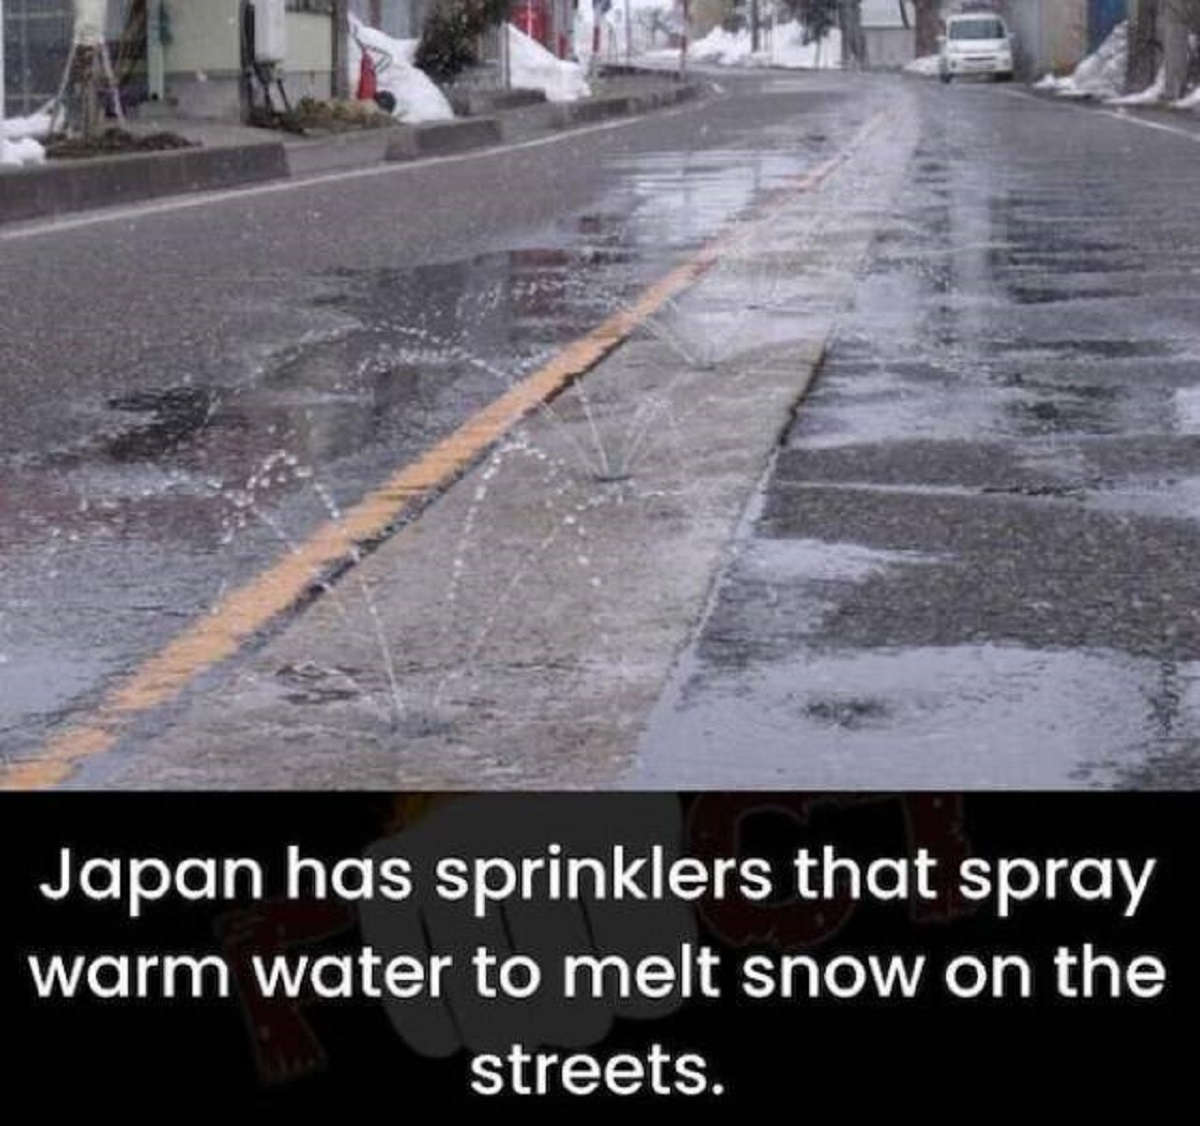 asphalt - Japan has sprinklers that spray warm water to melt snow on the streets.